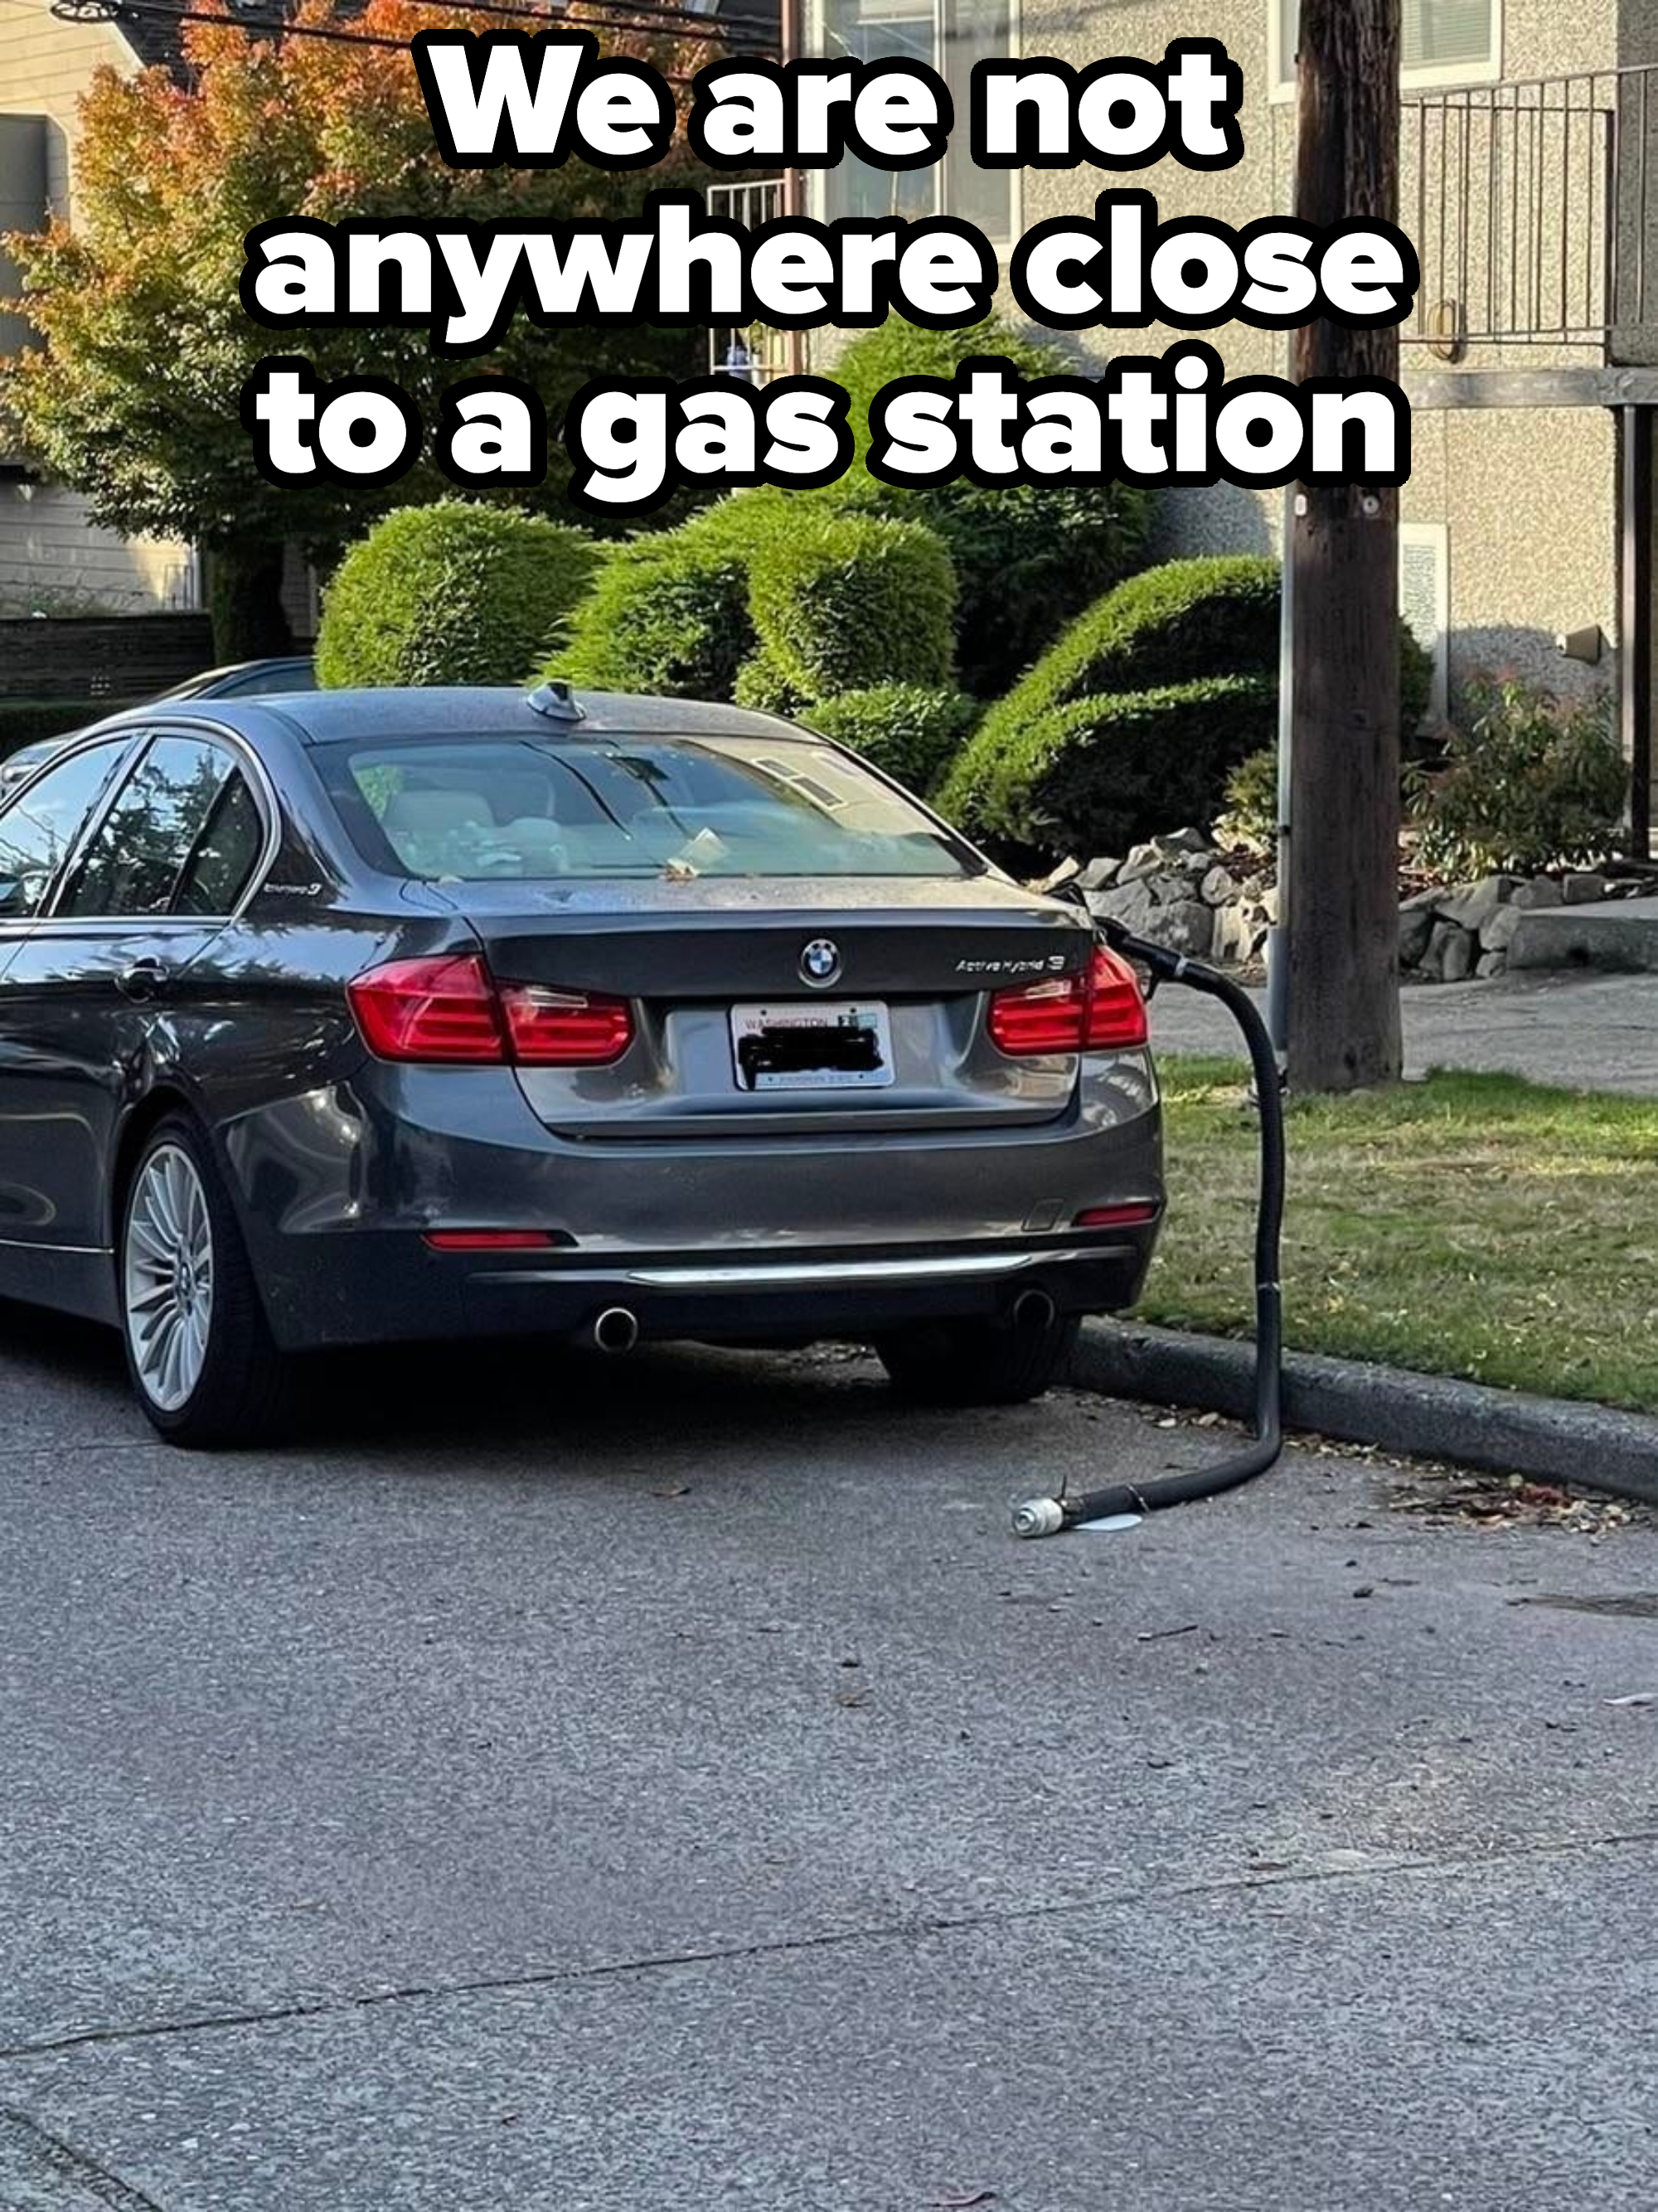 A gas station gas hose dangling out of a car on the road